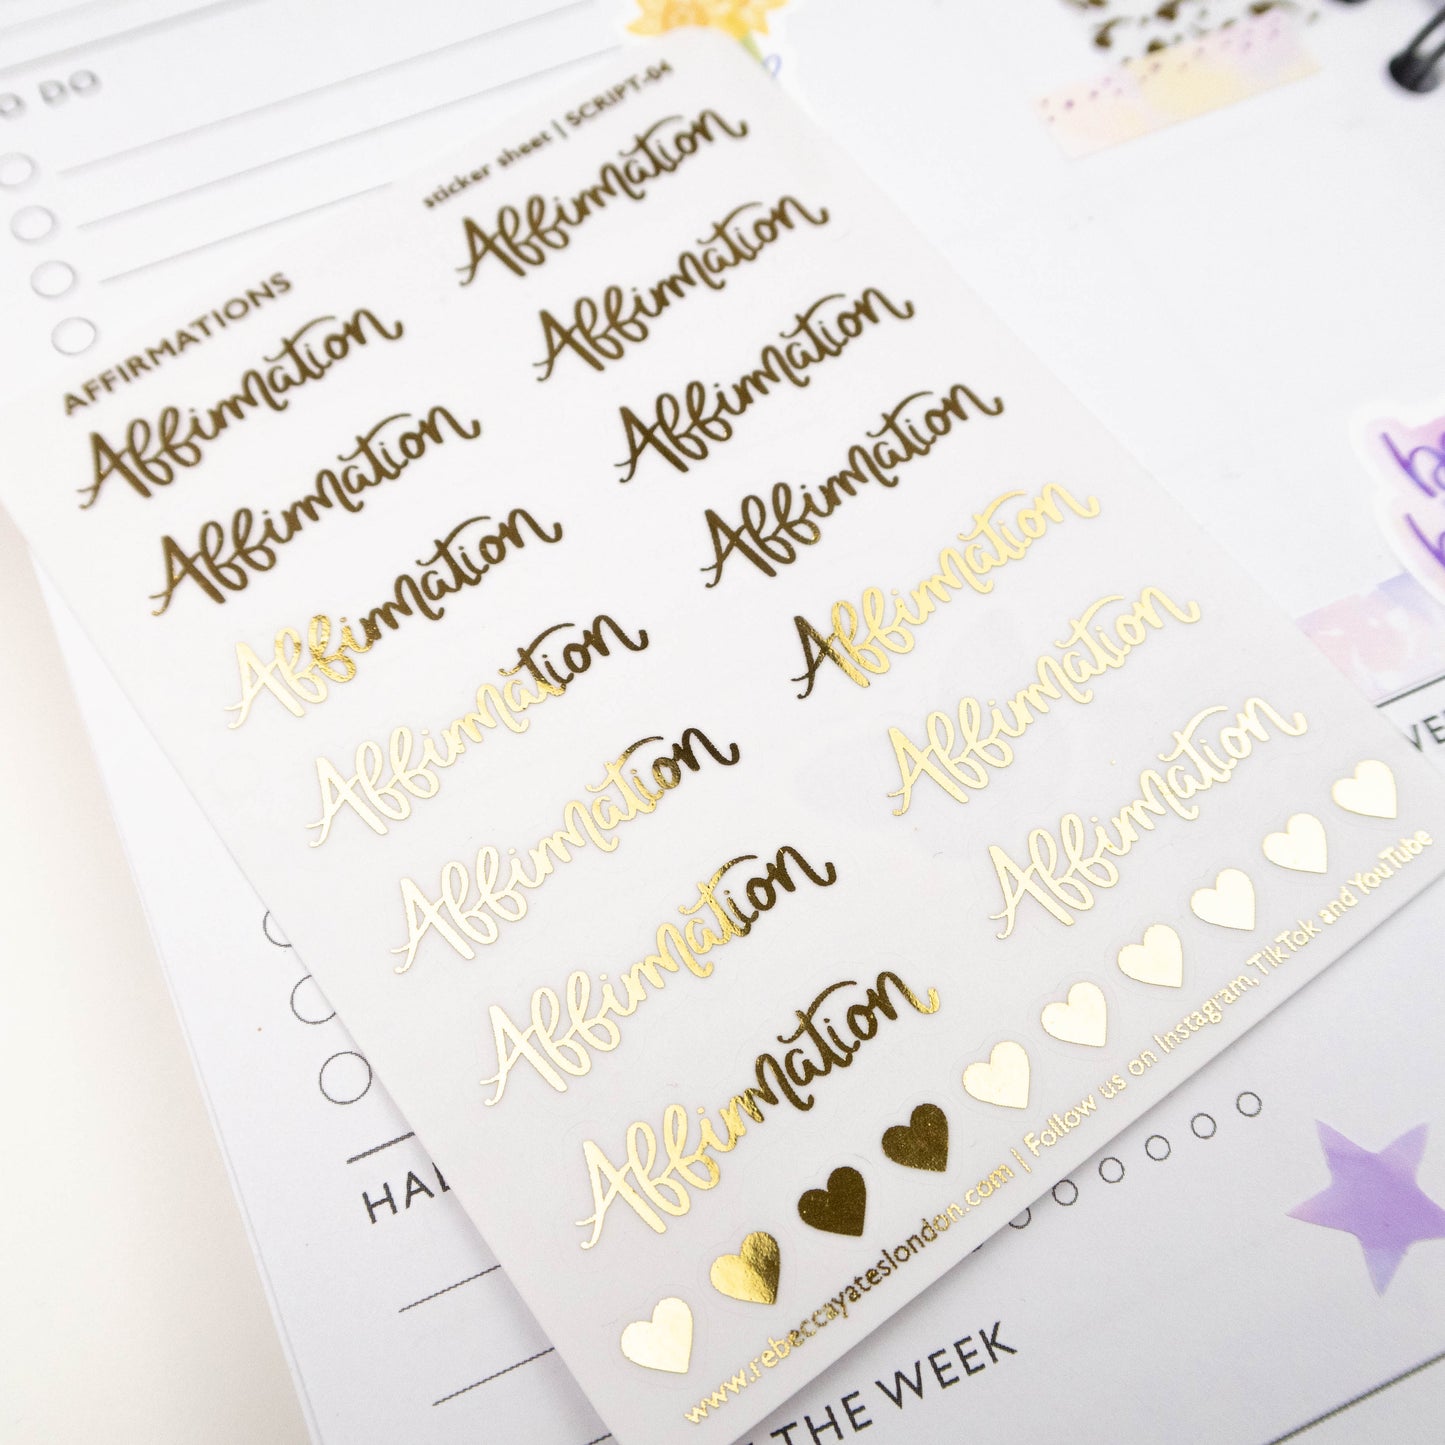 AFFIRMATIONS - FOILED PLANNER STICKERS